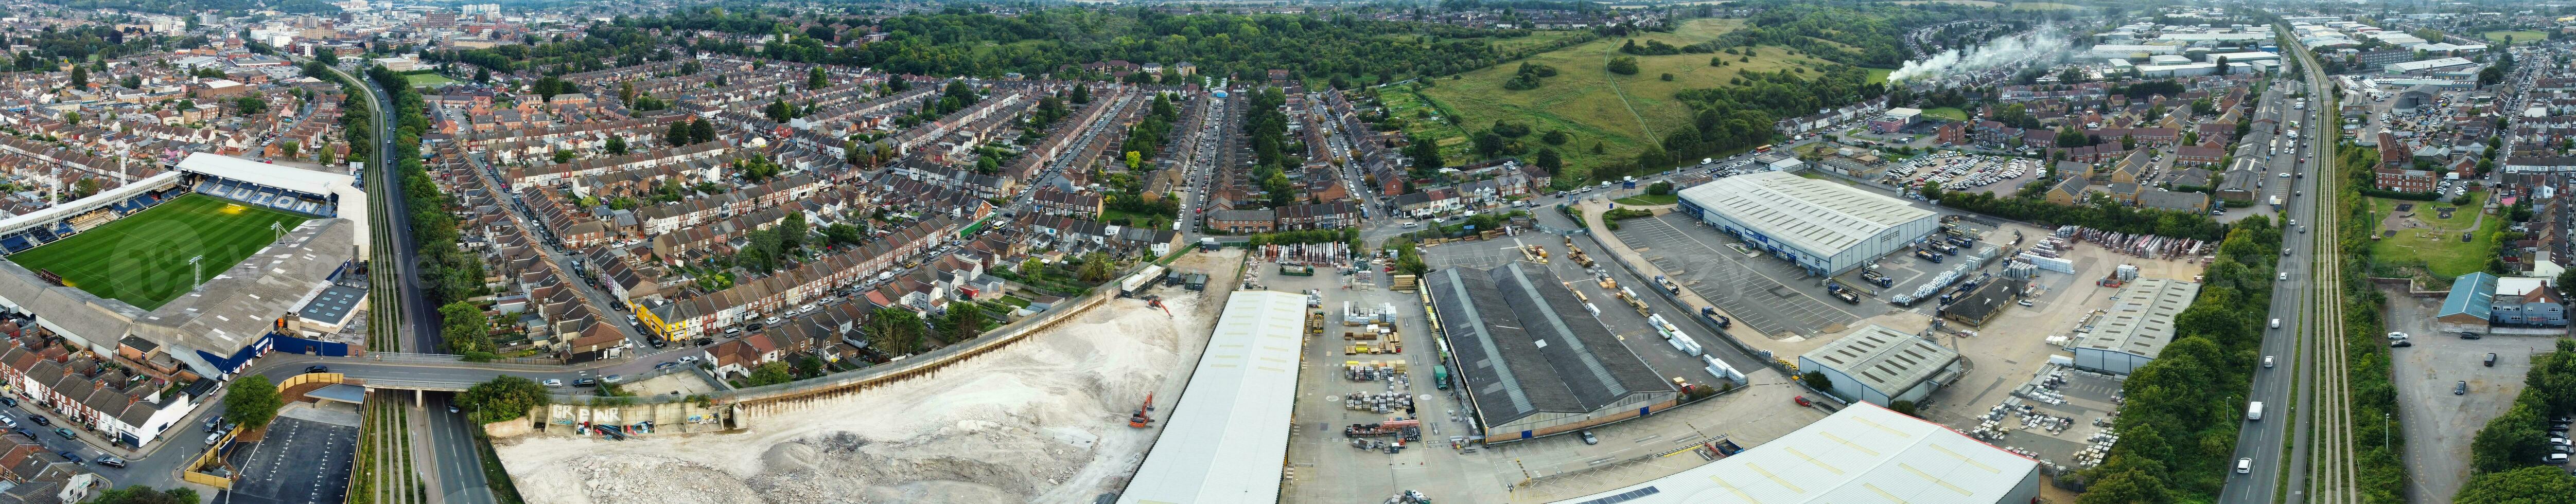 Aerial View of Residential Homes and Industrial Estate Combined at Dallow Road Near Farley Hills Luton City, England UK. The High Angle Footage Was Captured with Drone's Camera on September 7th, 2023 photo